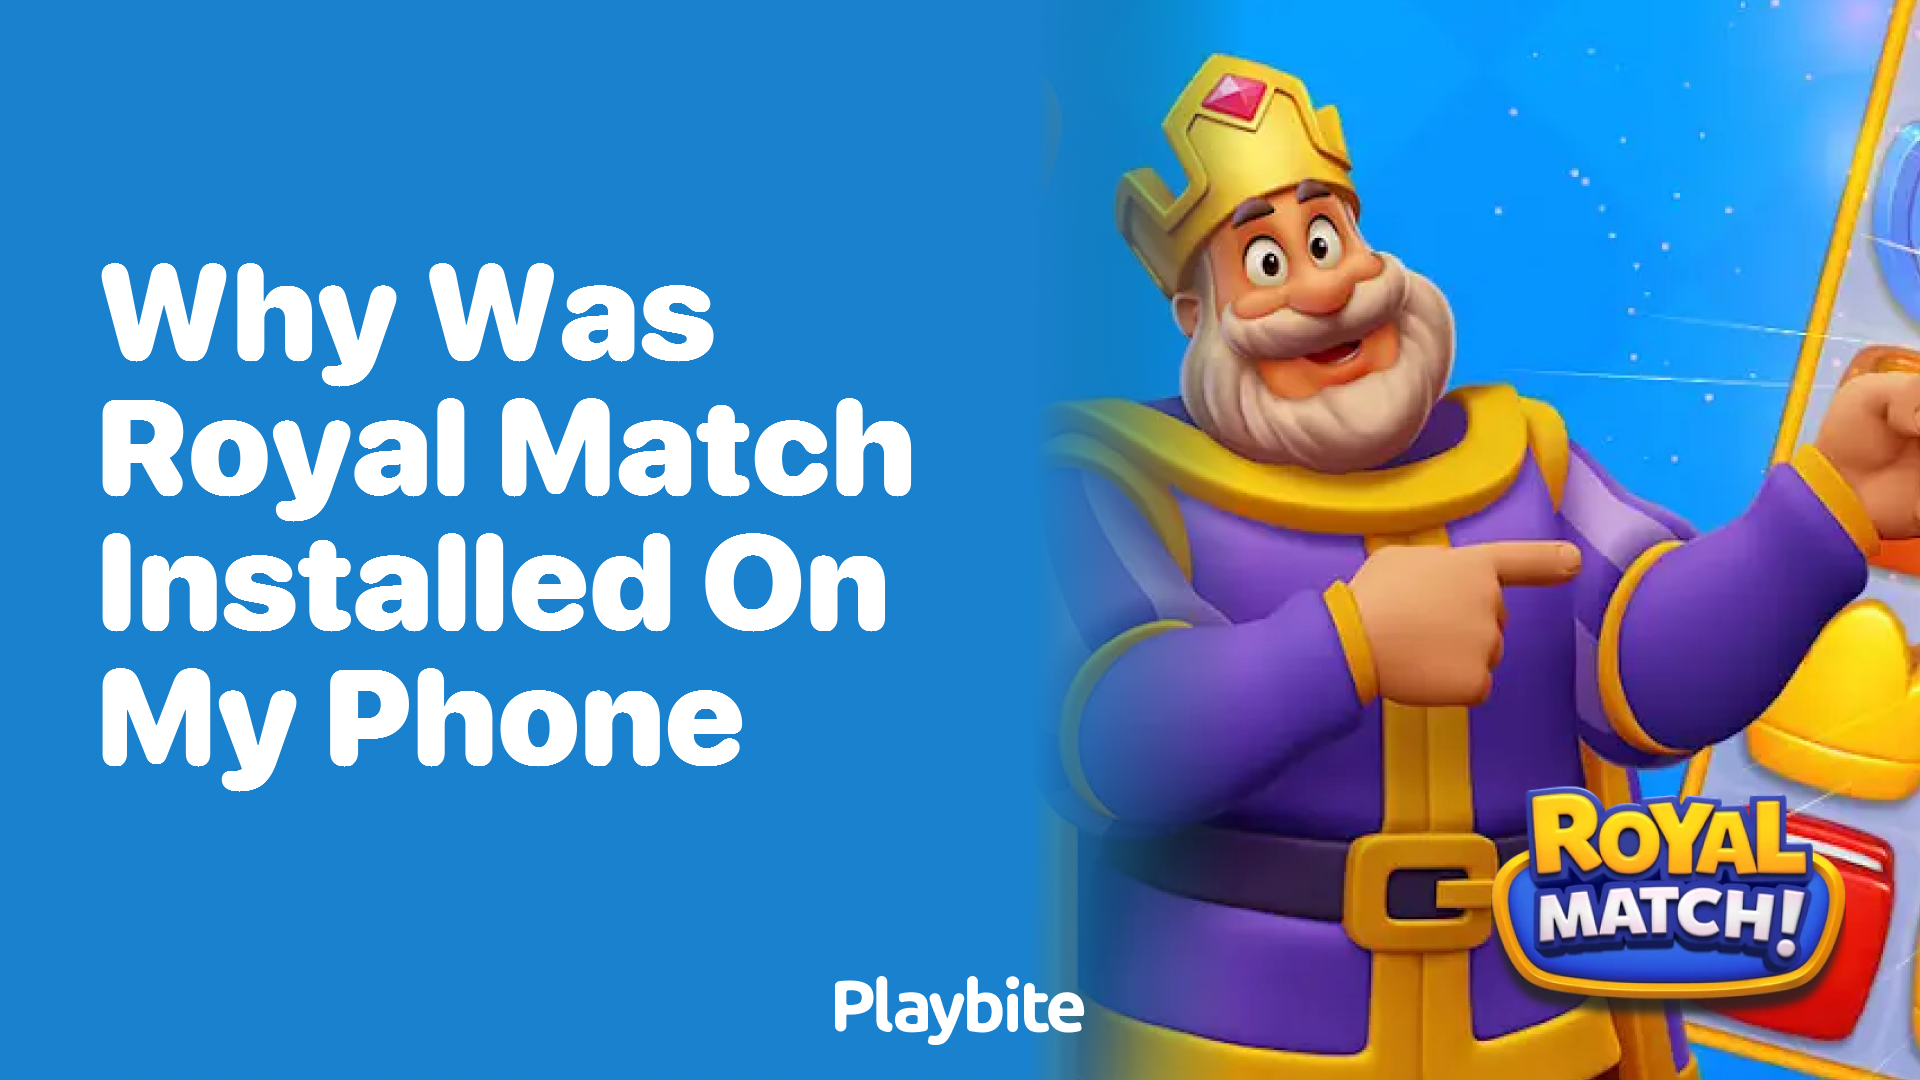 Why Was Royal Match Installed on My Phone?